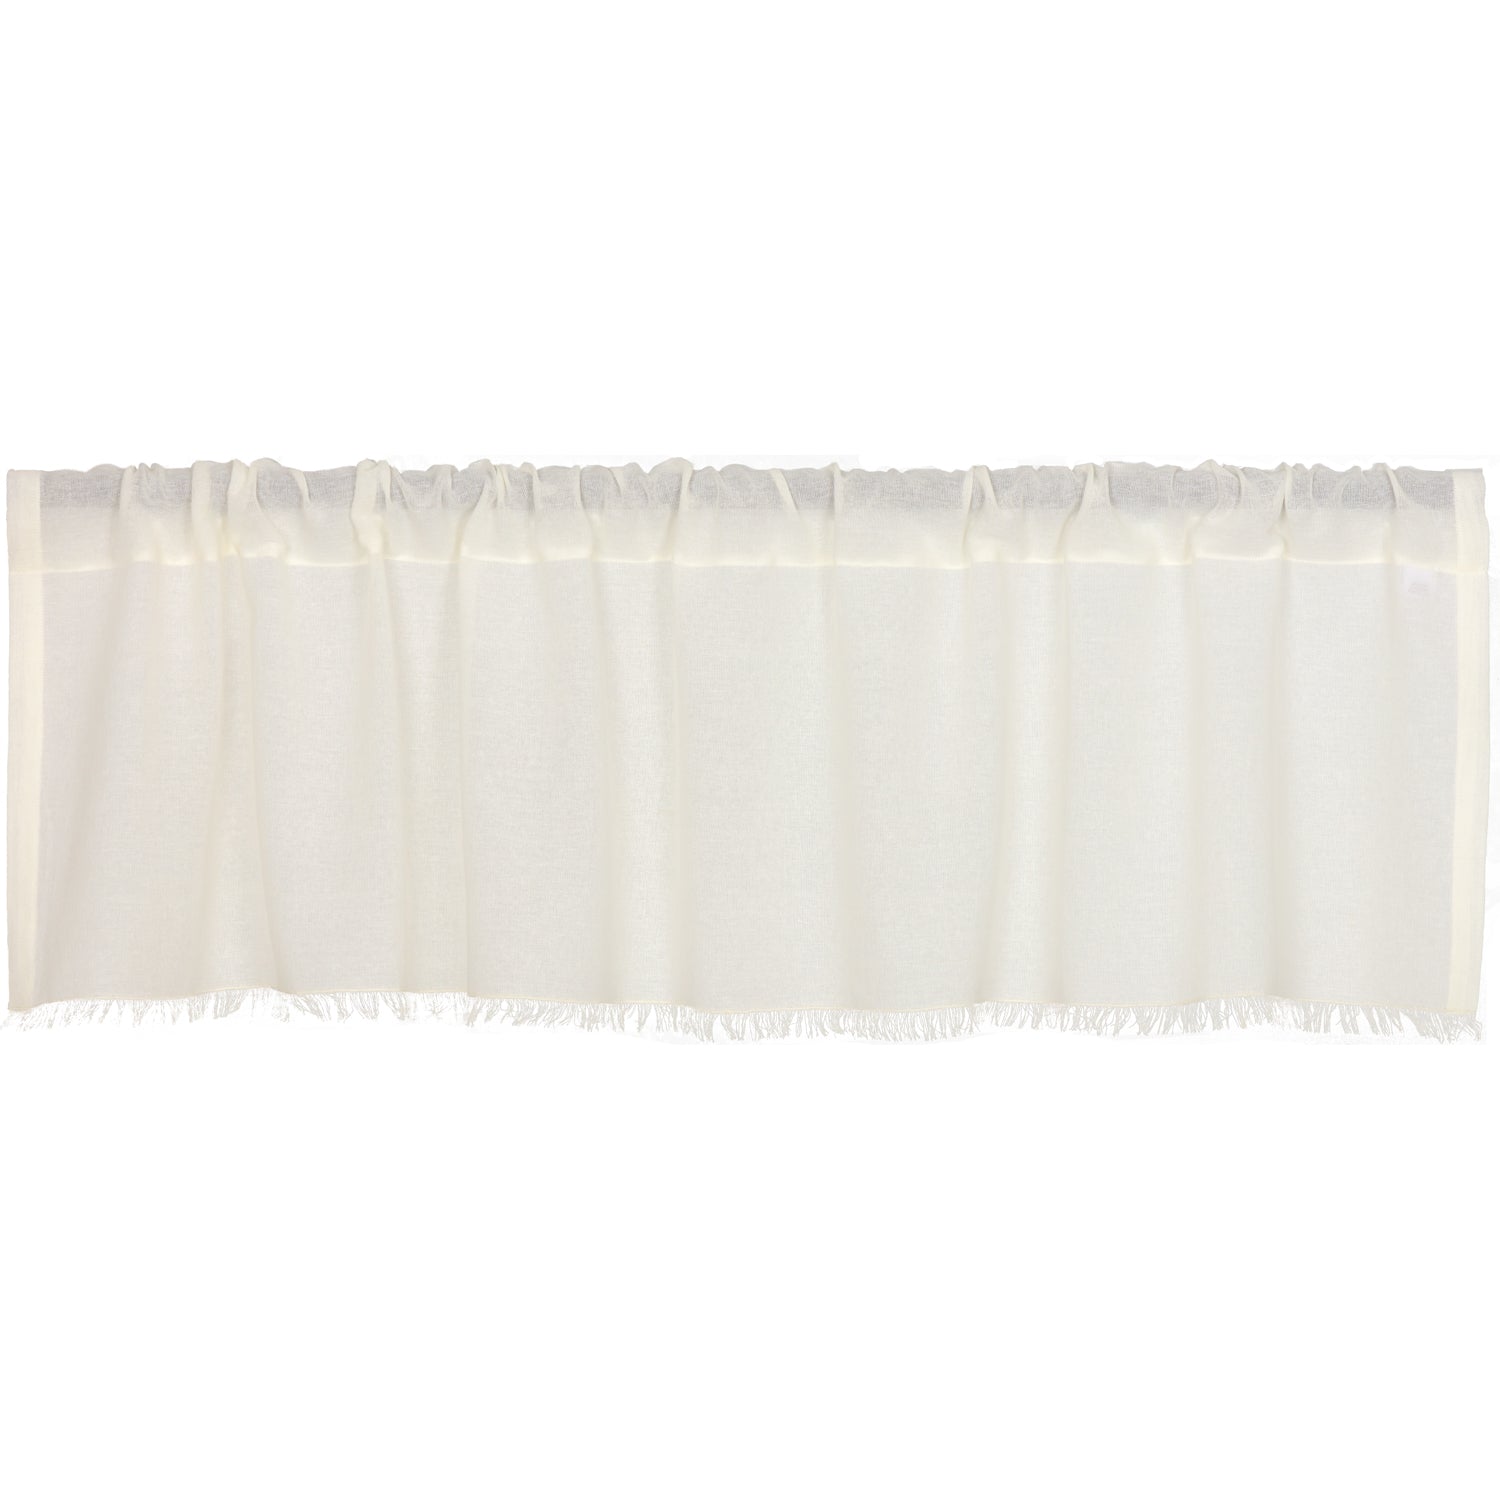 April & Olive Tobacco Cloth Antique White Valance Fringed 16x60 By VHC Brands